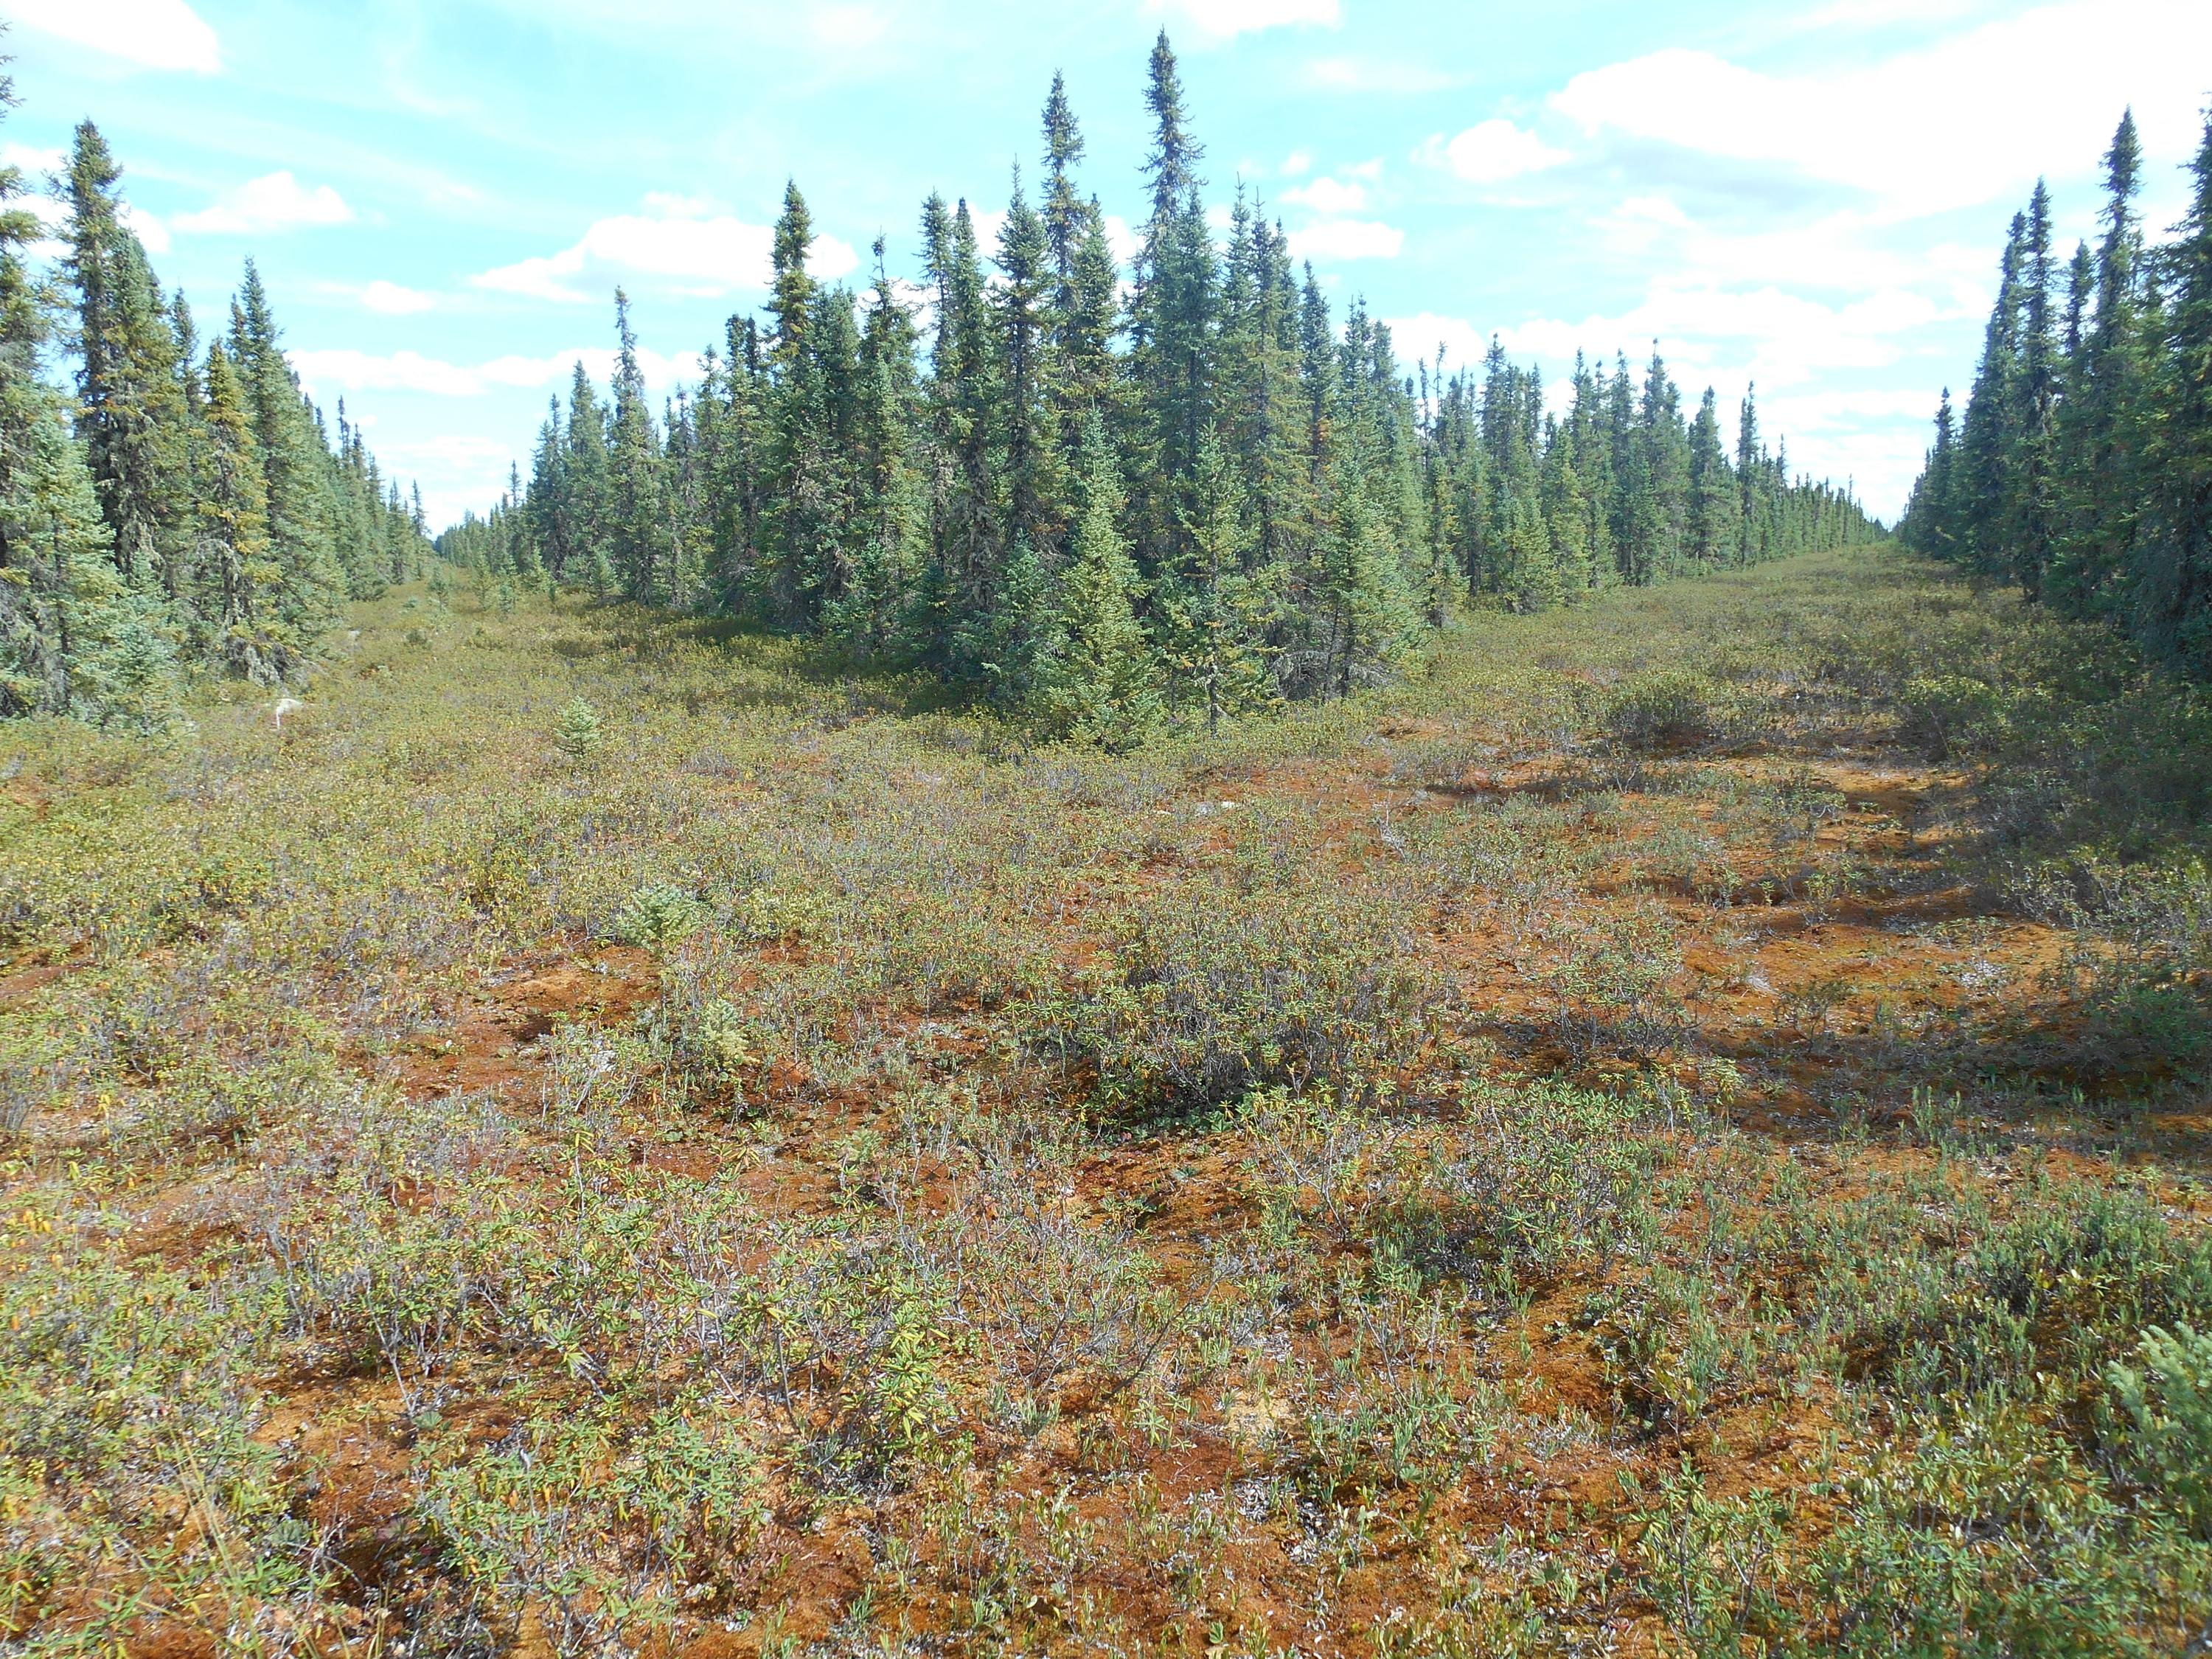 Lines cleared of trees in a forested peatland.